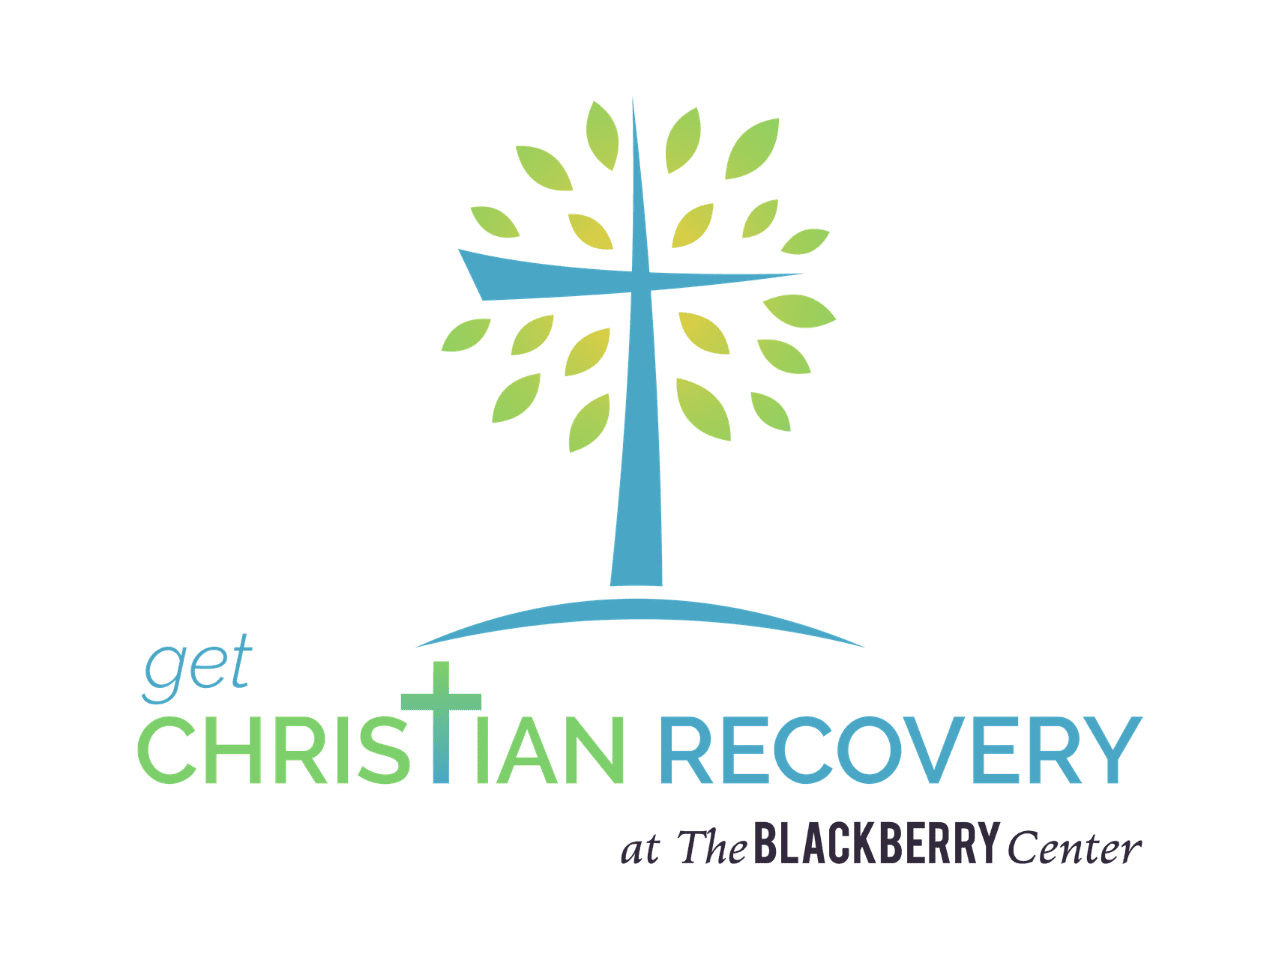 Rehab Center in Orlando, Florida Offers New Christian Recovery Program